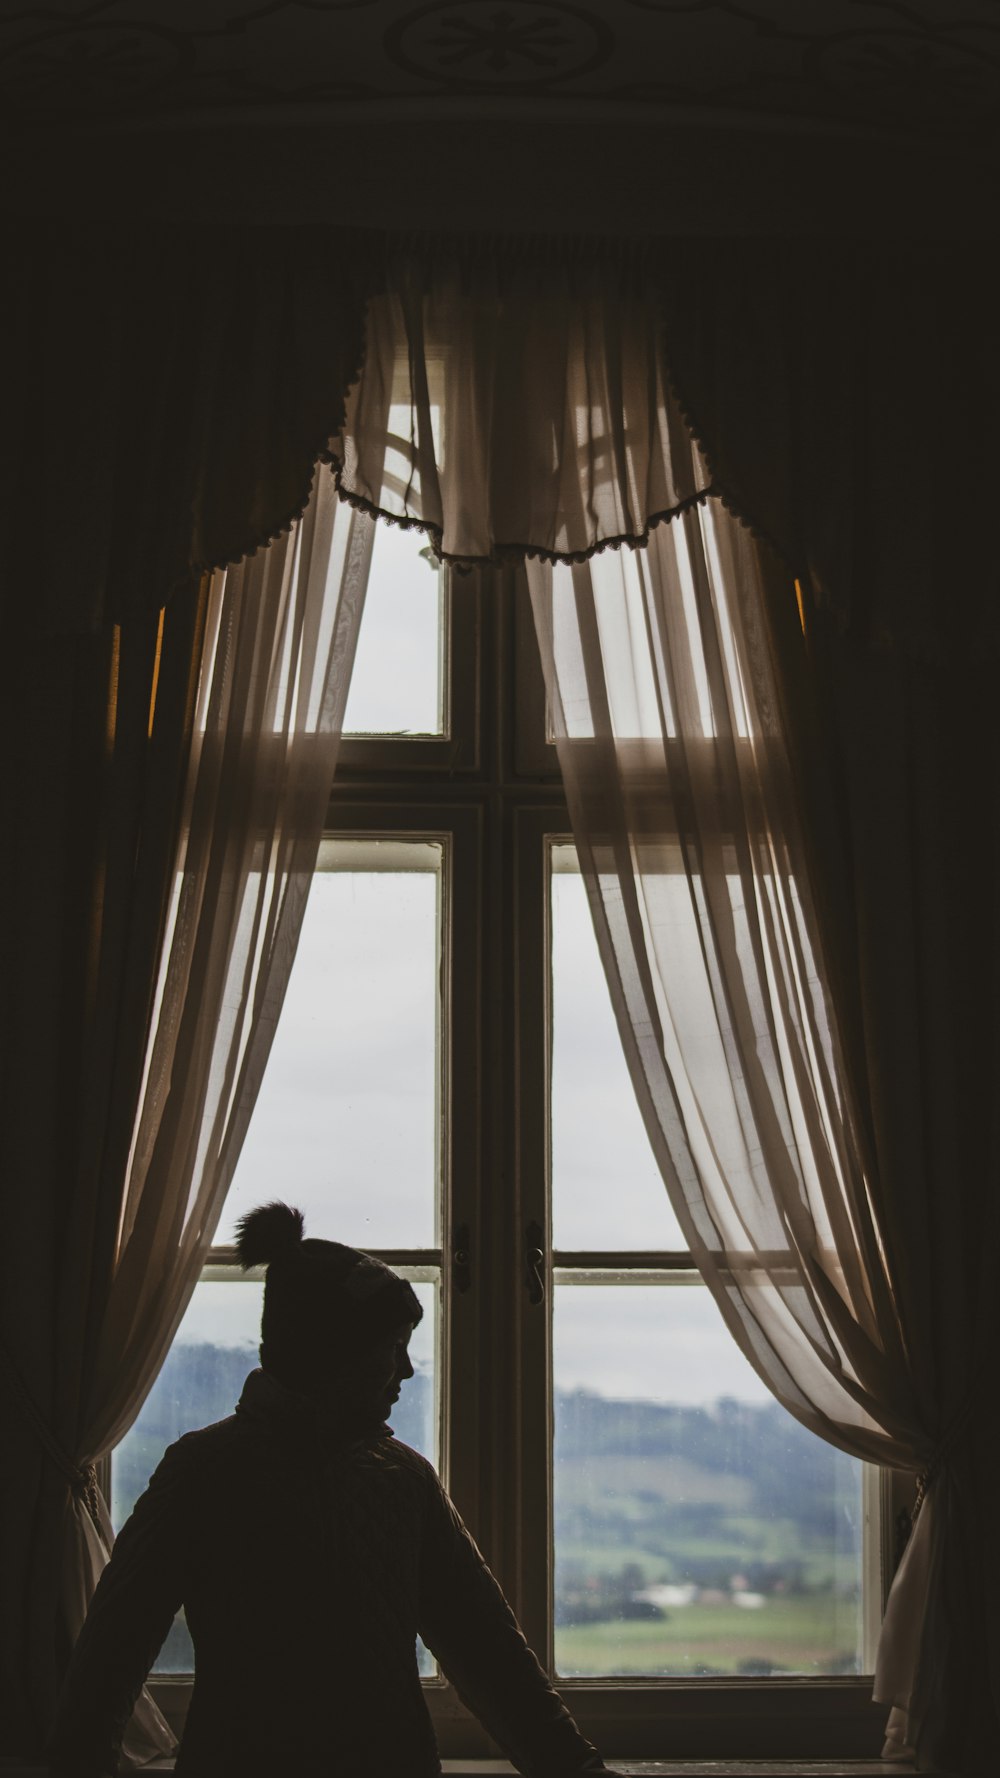 a silhouette of a man and woman looking out a window